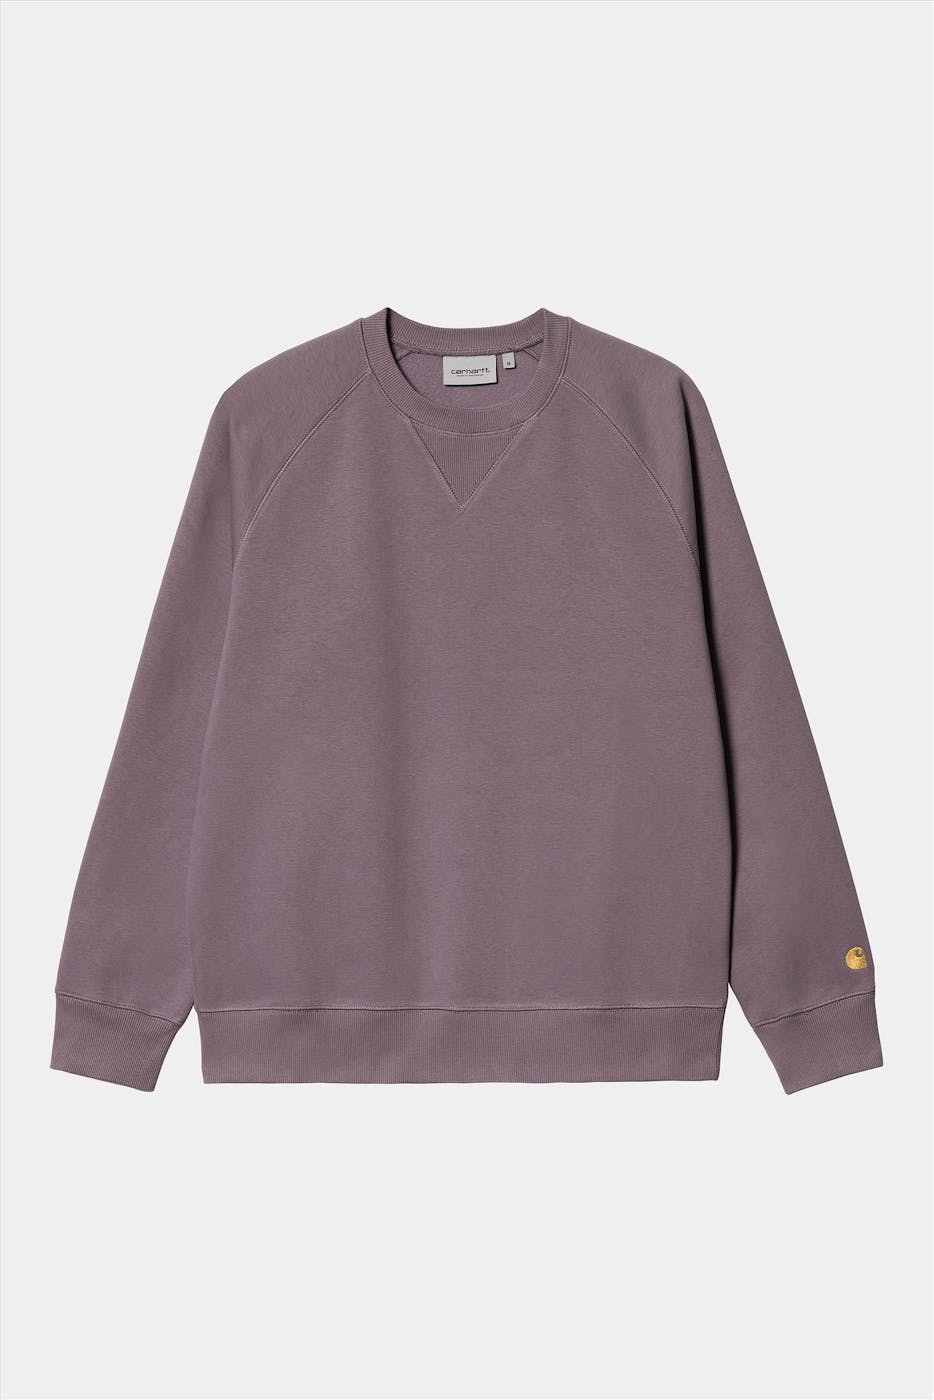 Carhartt WIP - Paarse Chase sweater